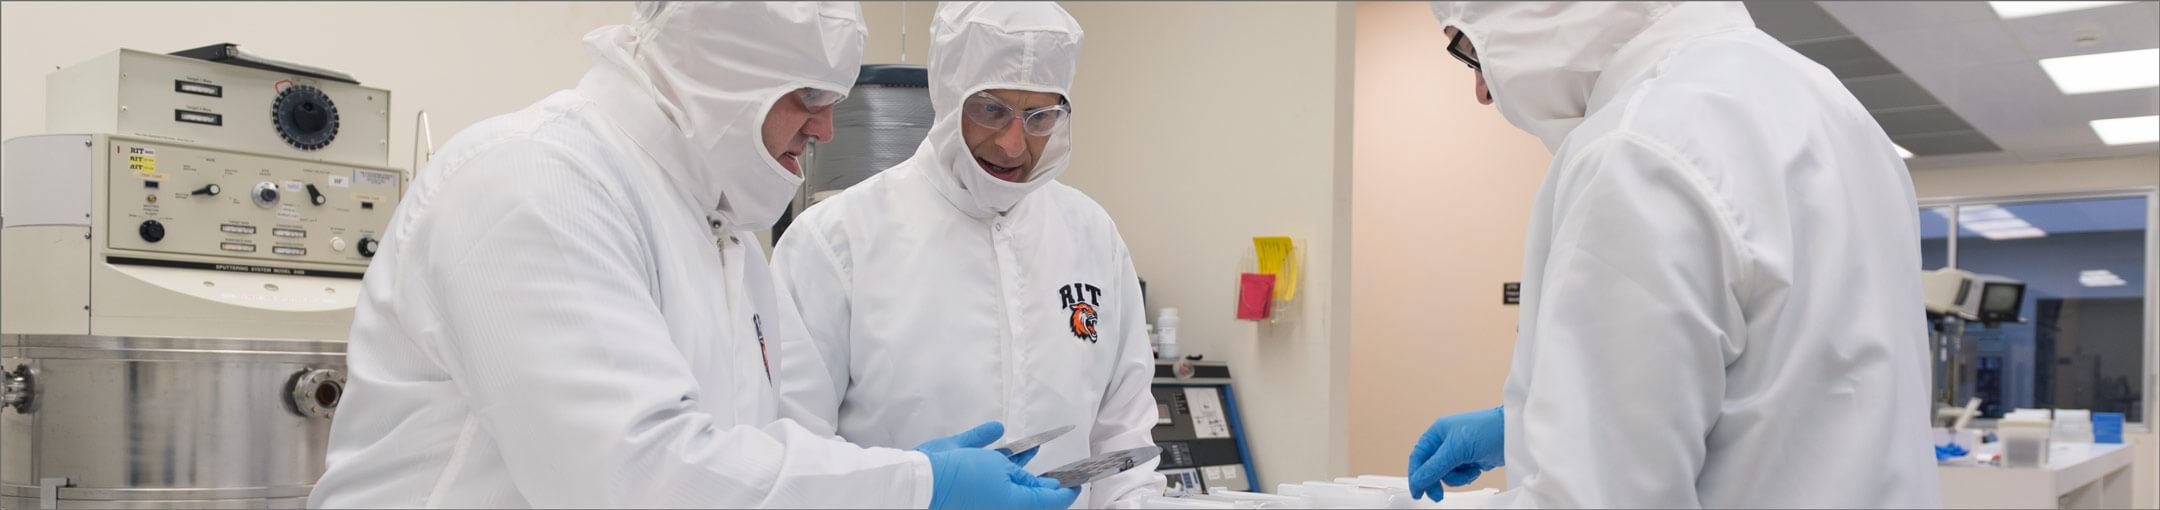 Three researchers in cleanroom suits looking at a disc of microelectronics.